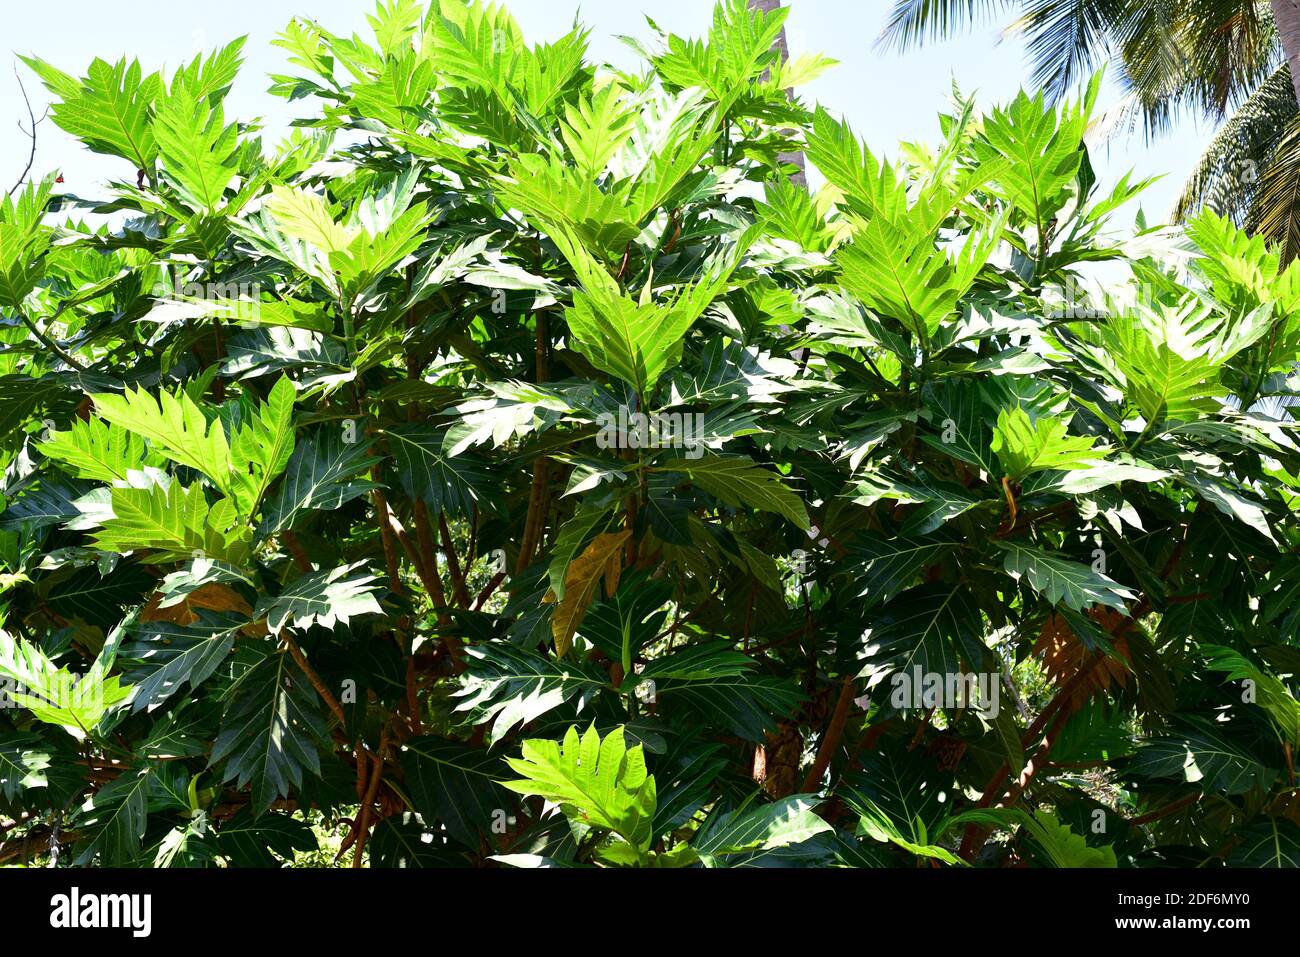 Breadfruit (Artocarpus altilis) is a tree native to south Pacific but cultivated in others tropicals regions for its edible fruits and seeds. This Stock Photo